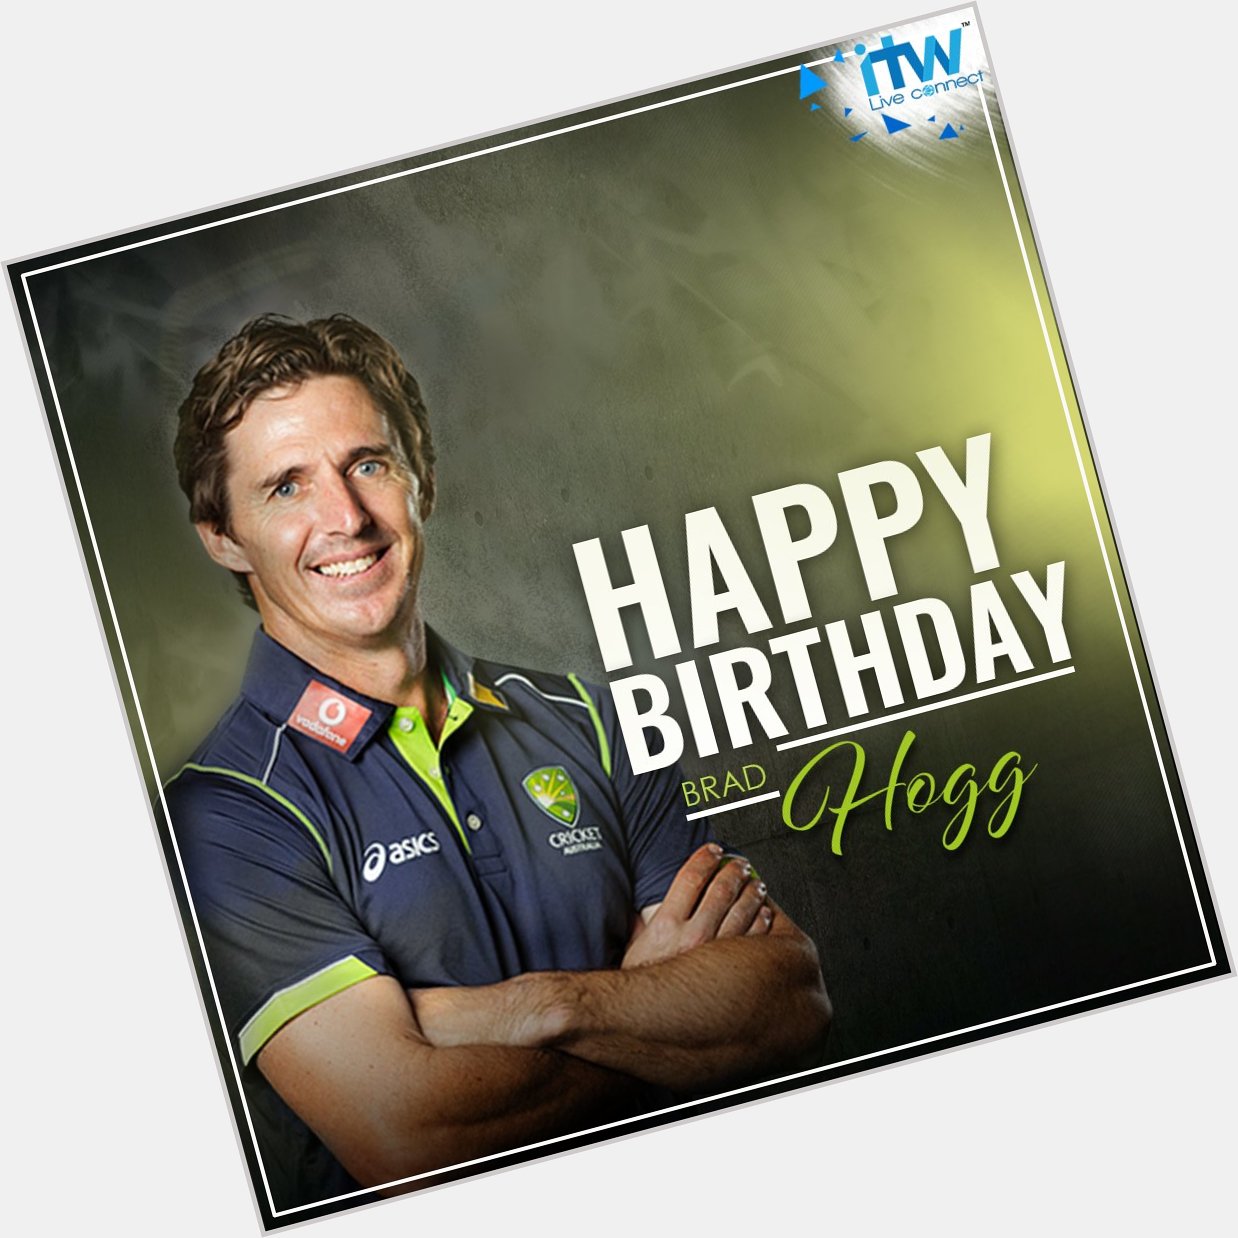 Wishing two time winner with Australian, a very Happy Birthday! 